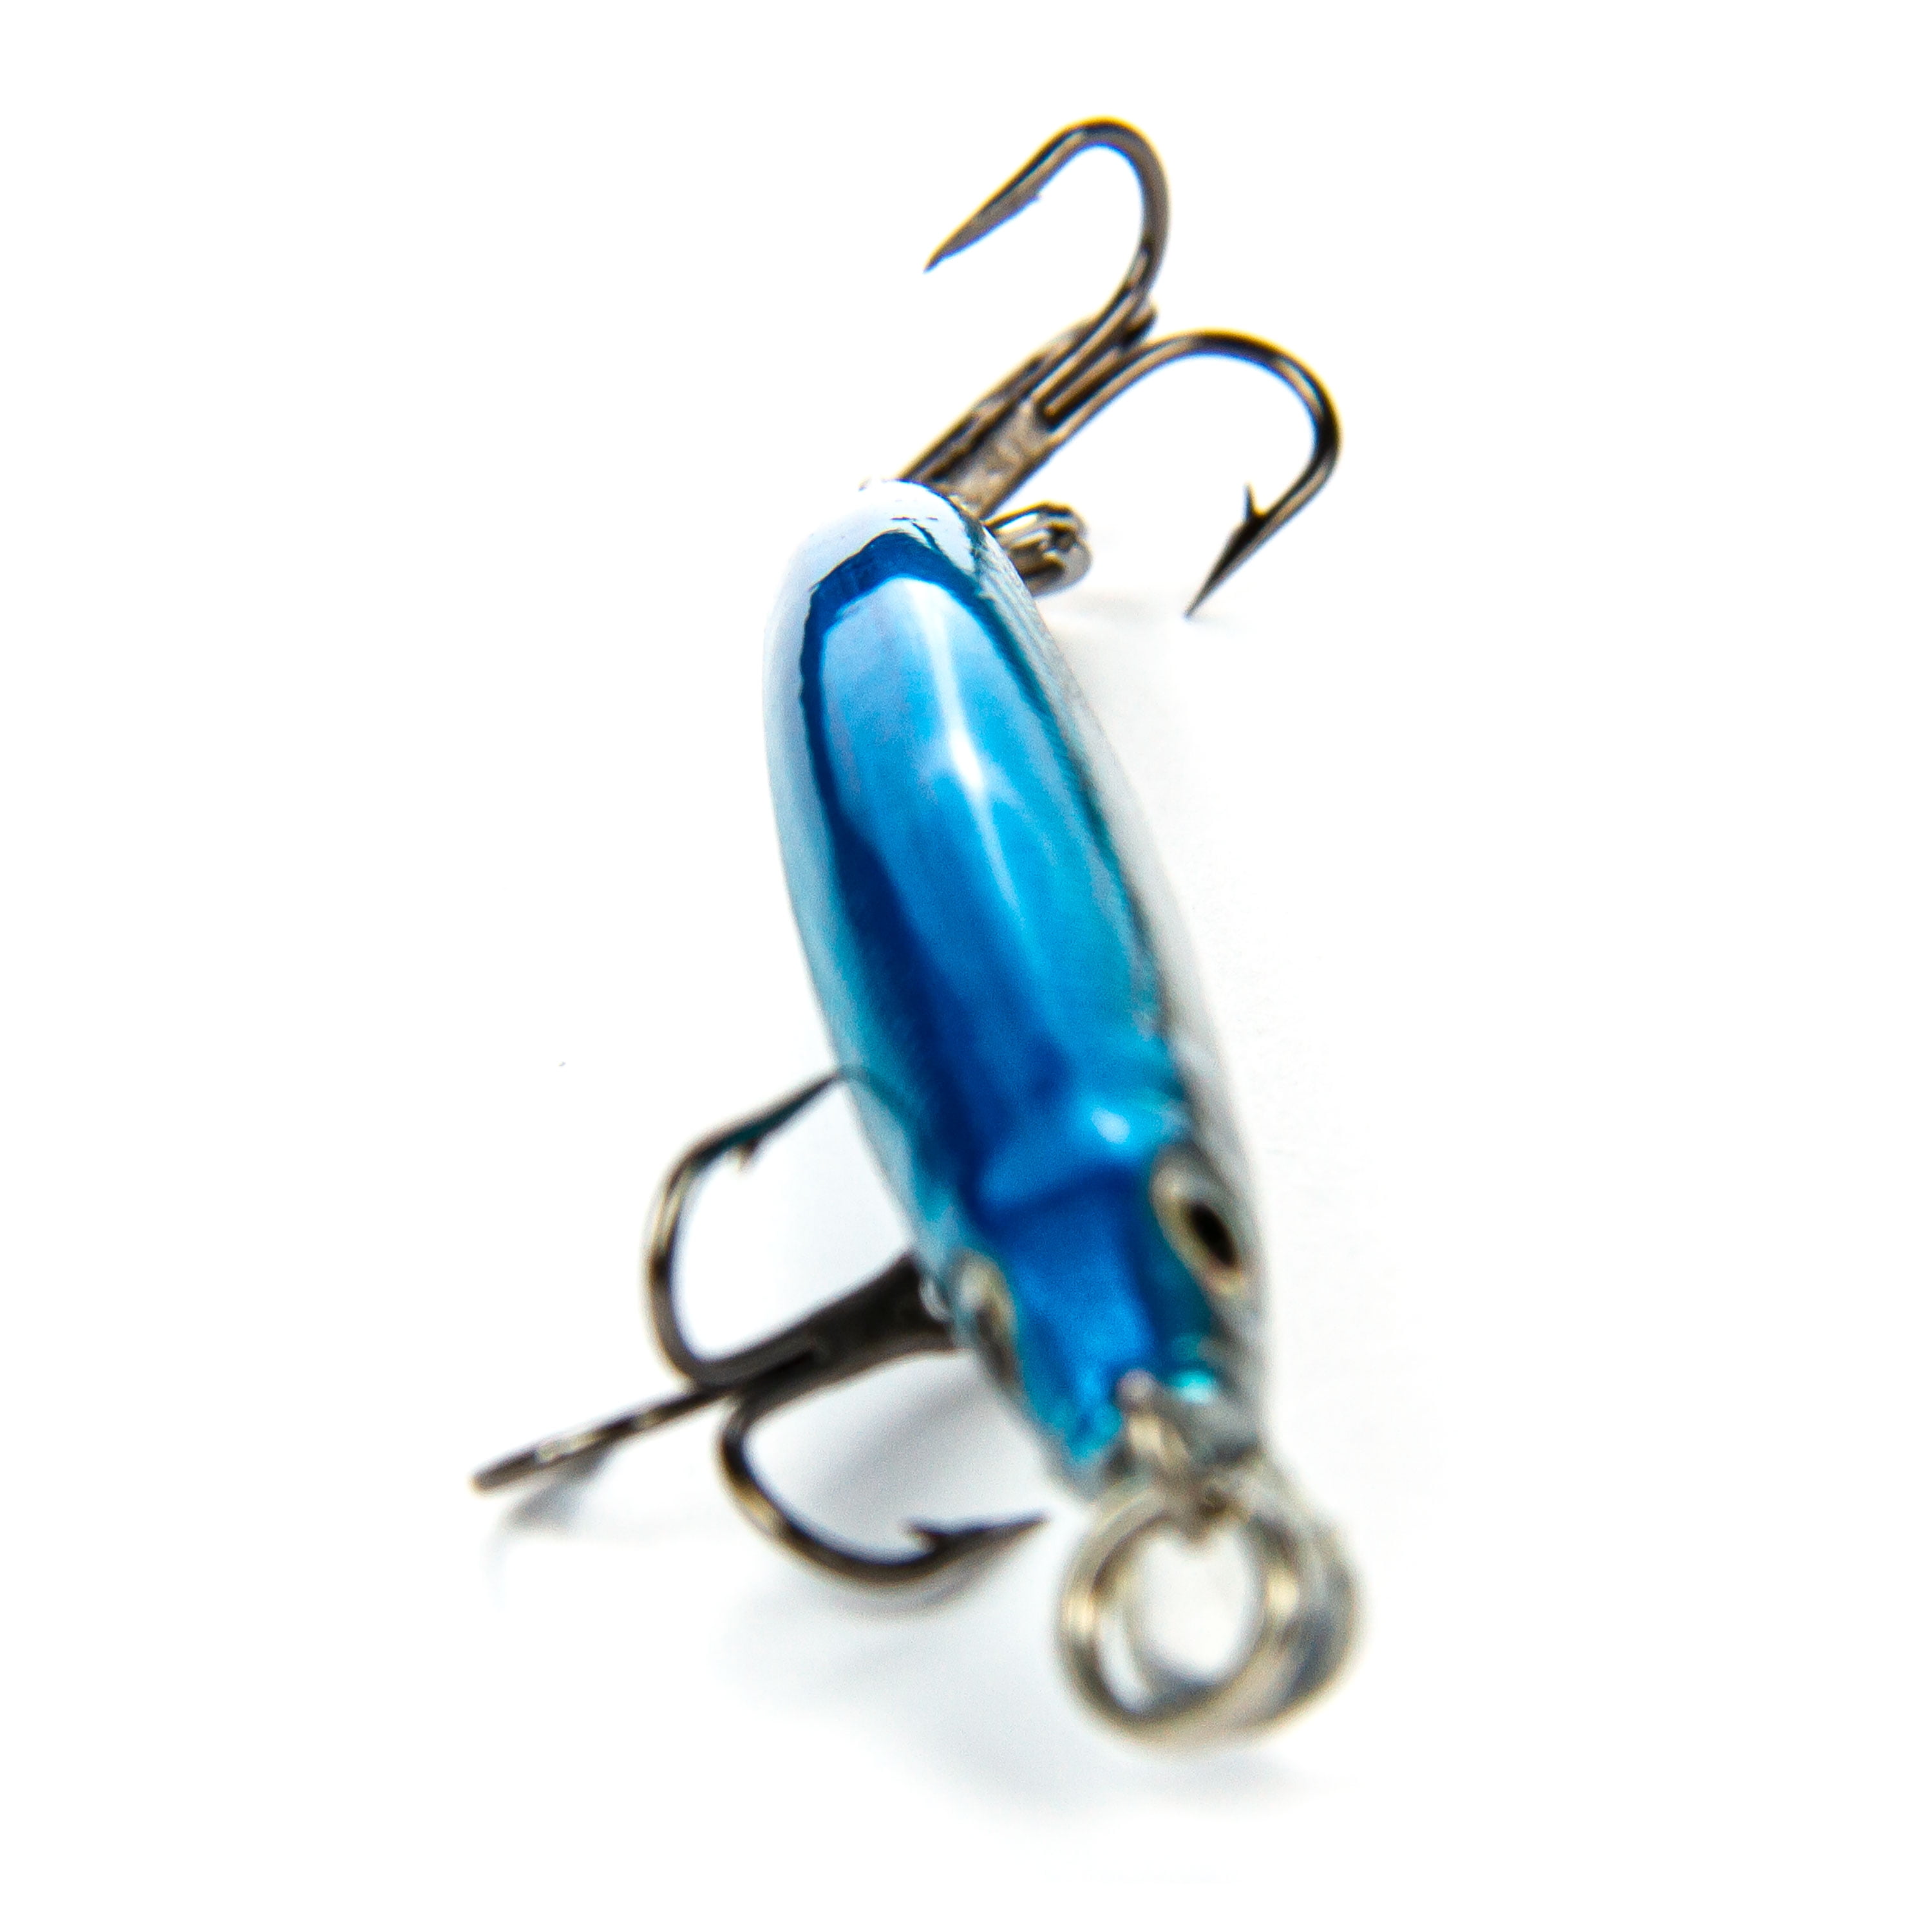  iland co. ILHH920-BL/WH Hoo-La Hood Chr Blue/White 7 1/8in 1  7/8oz : Fishing Diving Lures : Sports & Outdoors